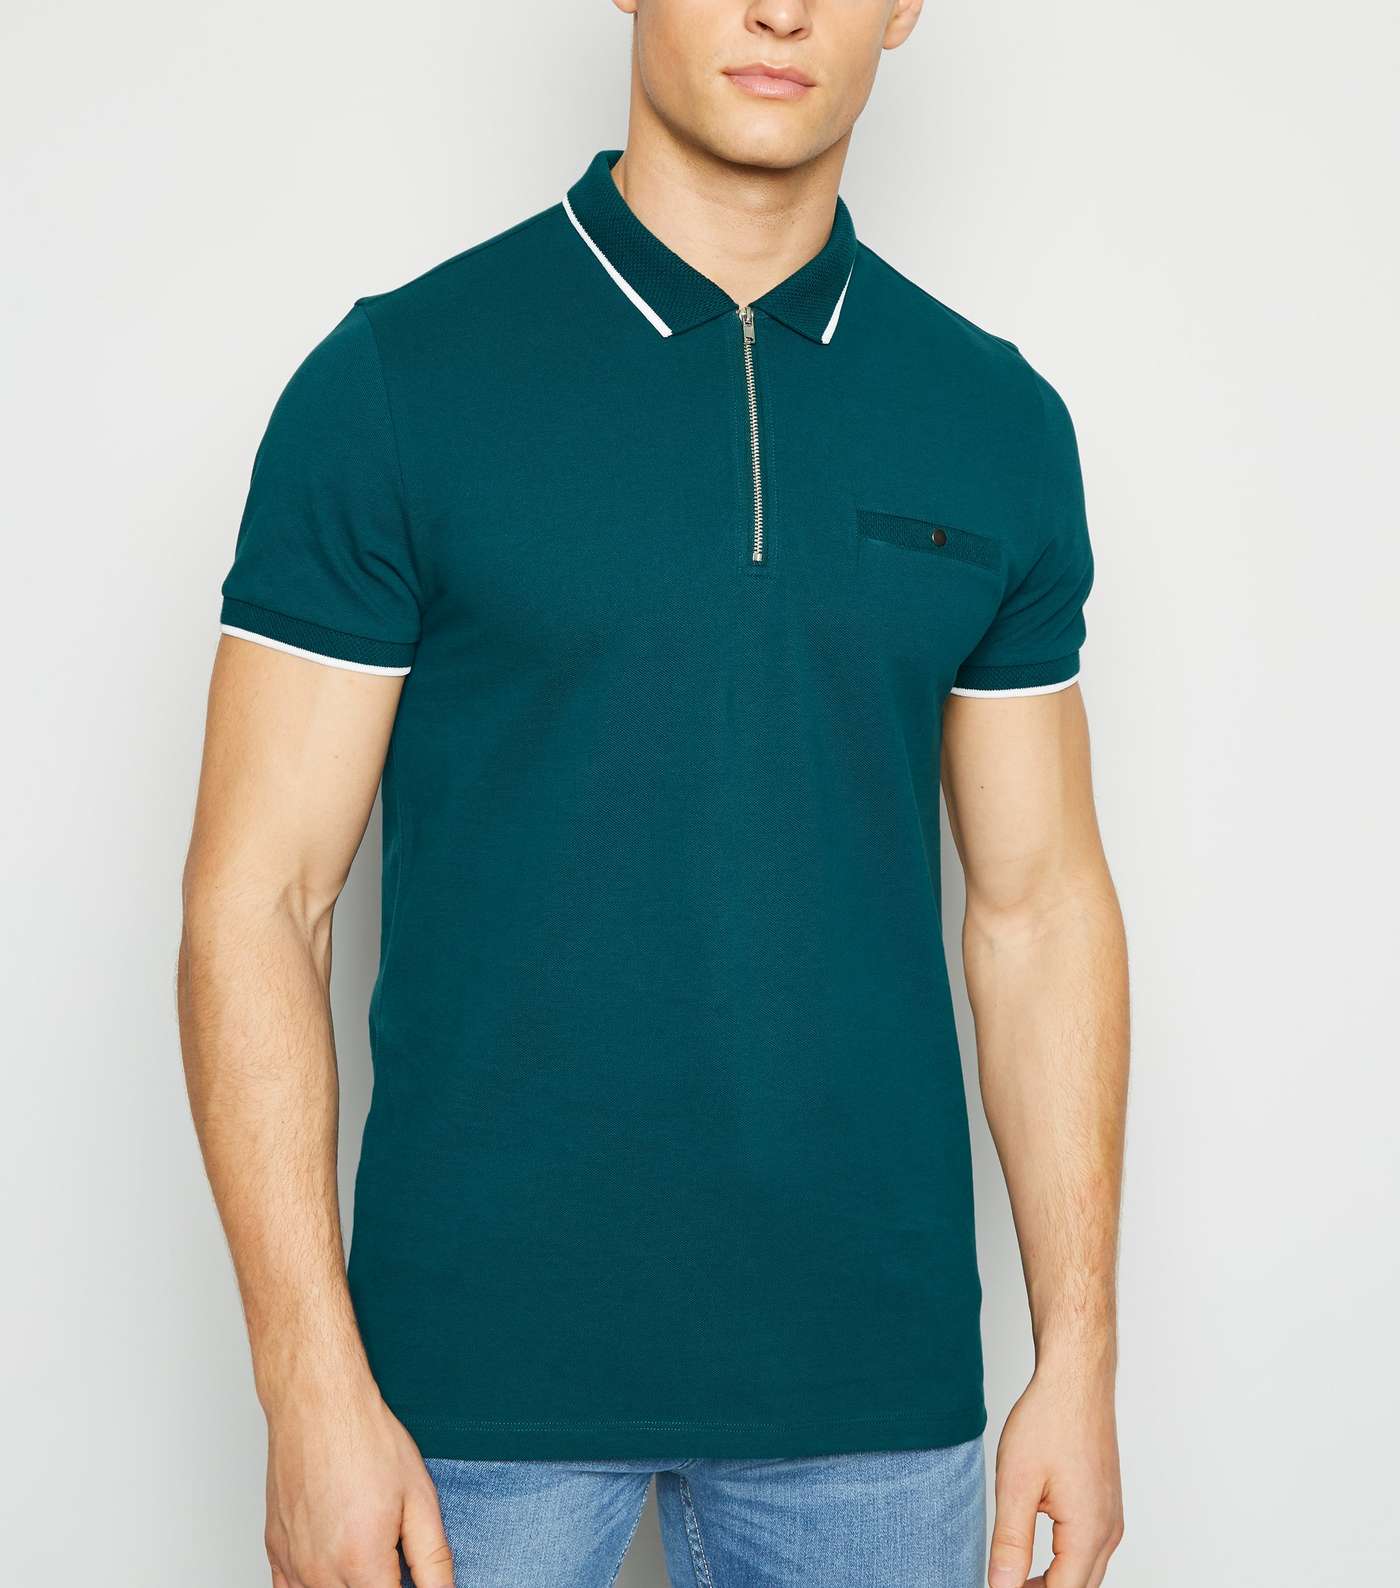 Teal Tipped Zip Front Polo Shirt